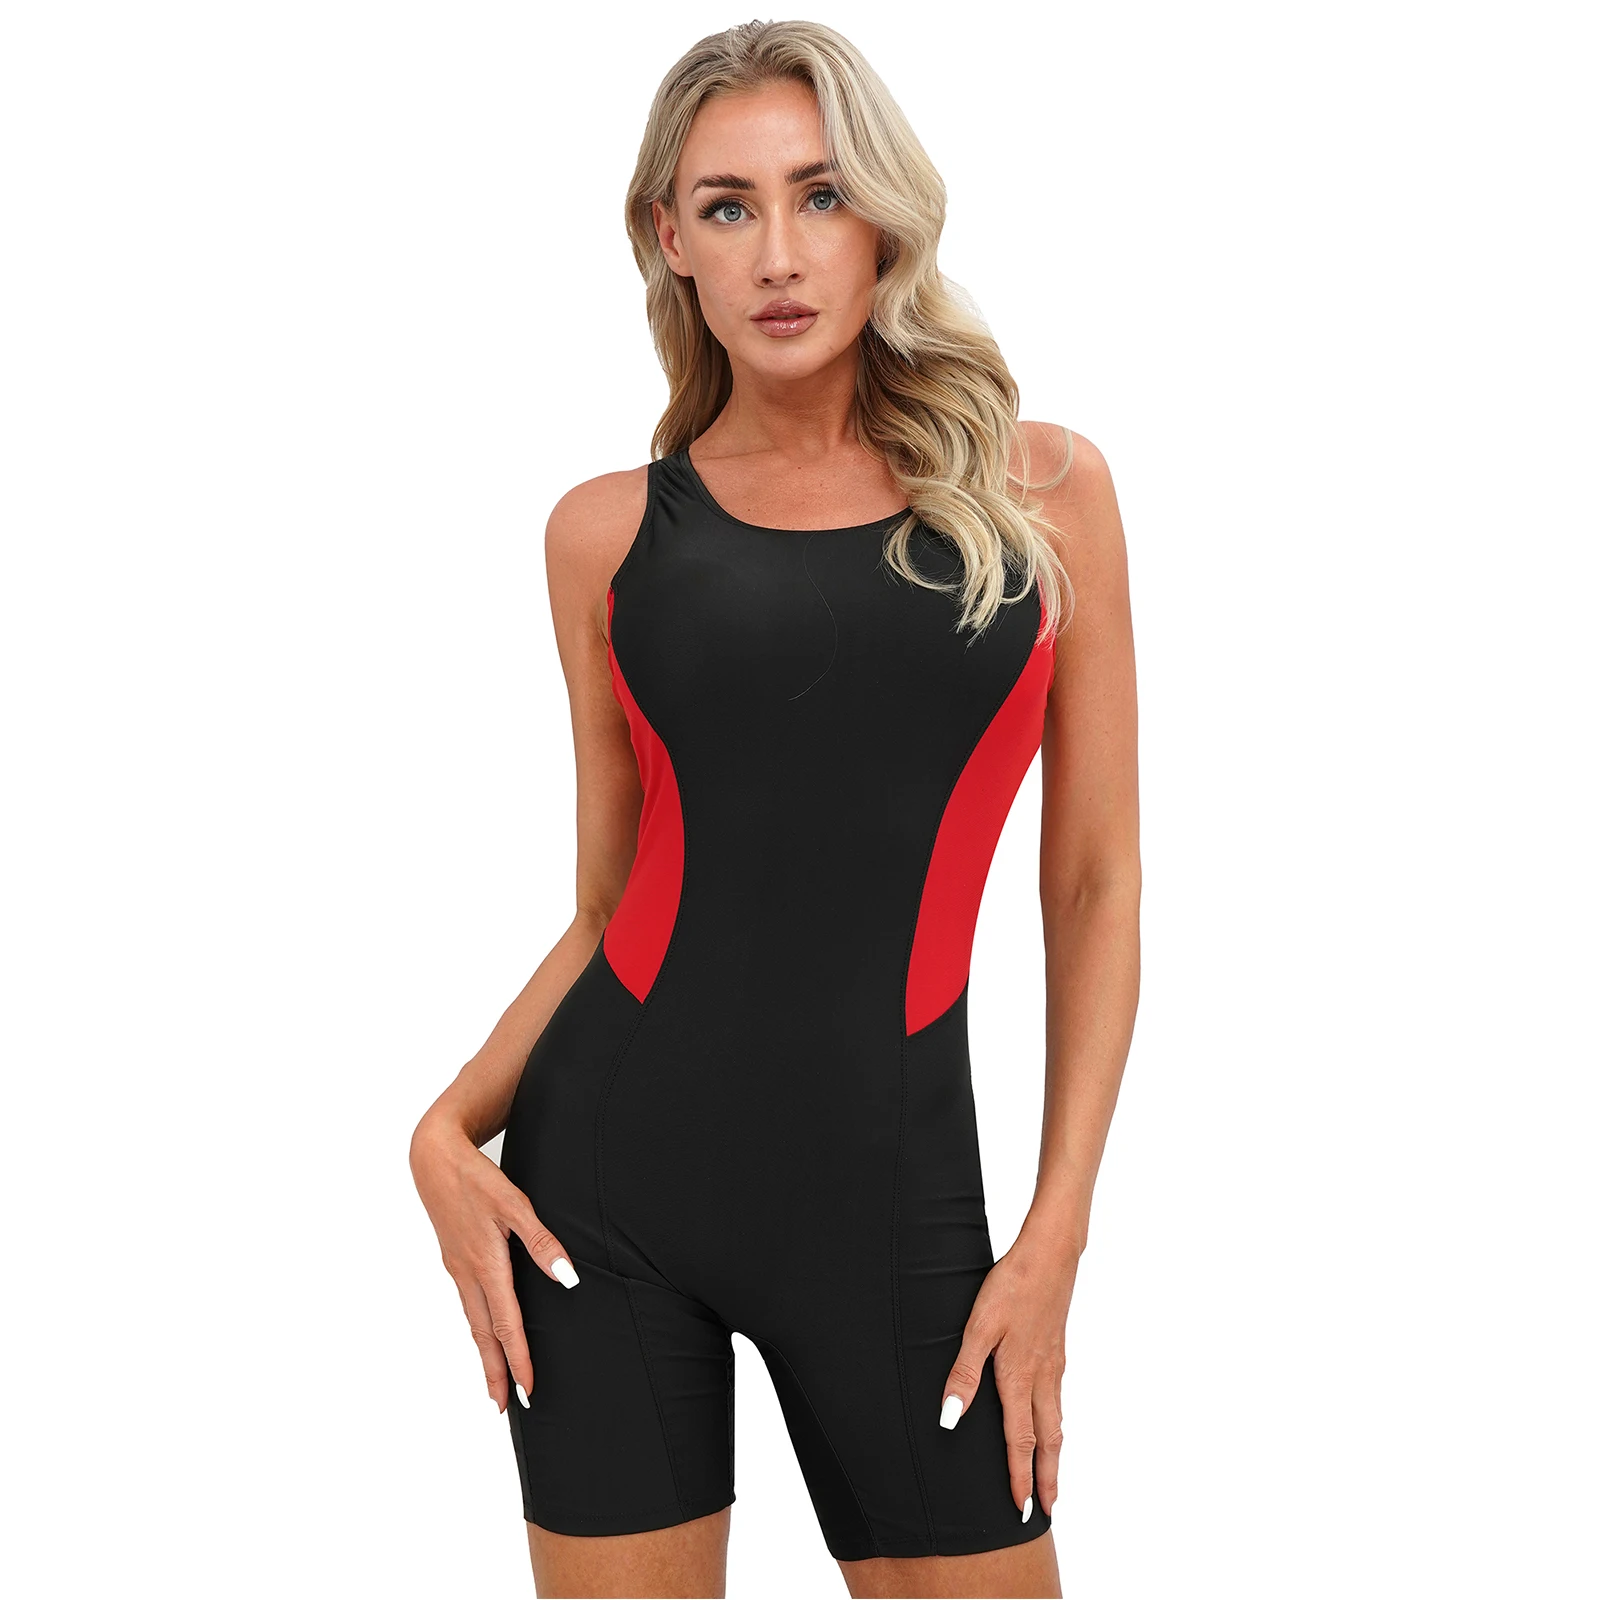 Women One-piece Swimsuit Sleeveless Removable Chest Pads Keyhole Back Stretchy Swimming Jumpsuit Bodysuit Pool Beach Swimwear